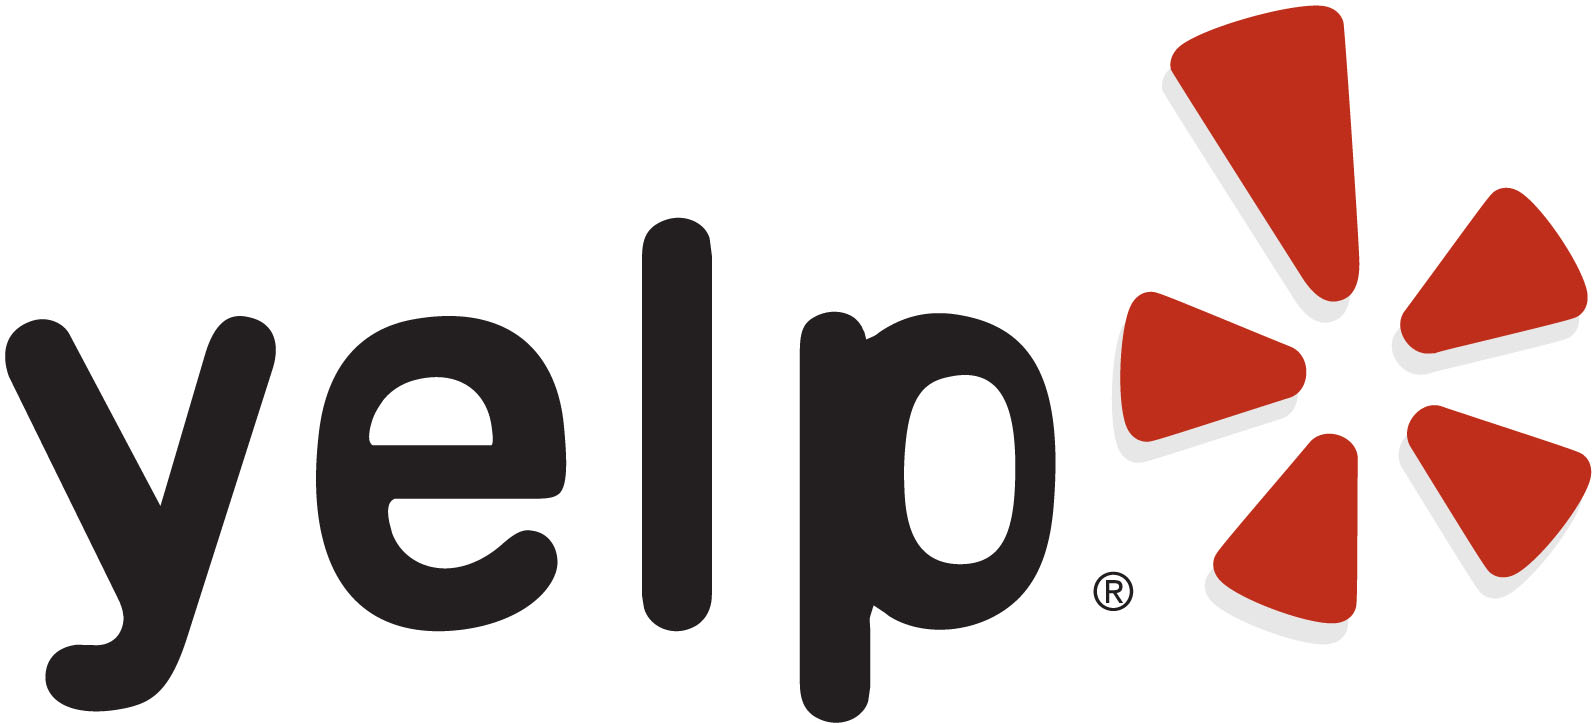 805 Productions create videos for Yelp and local companies in Santa Barbara area.